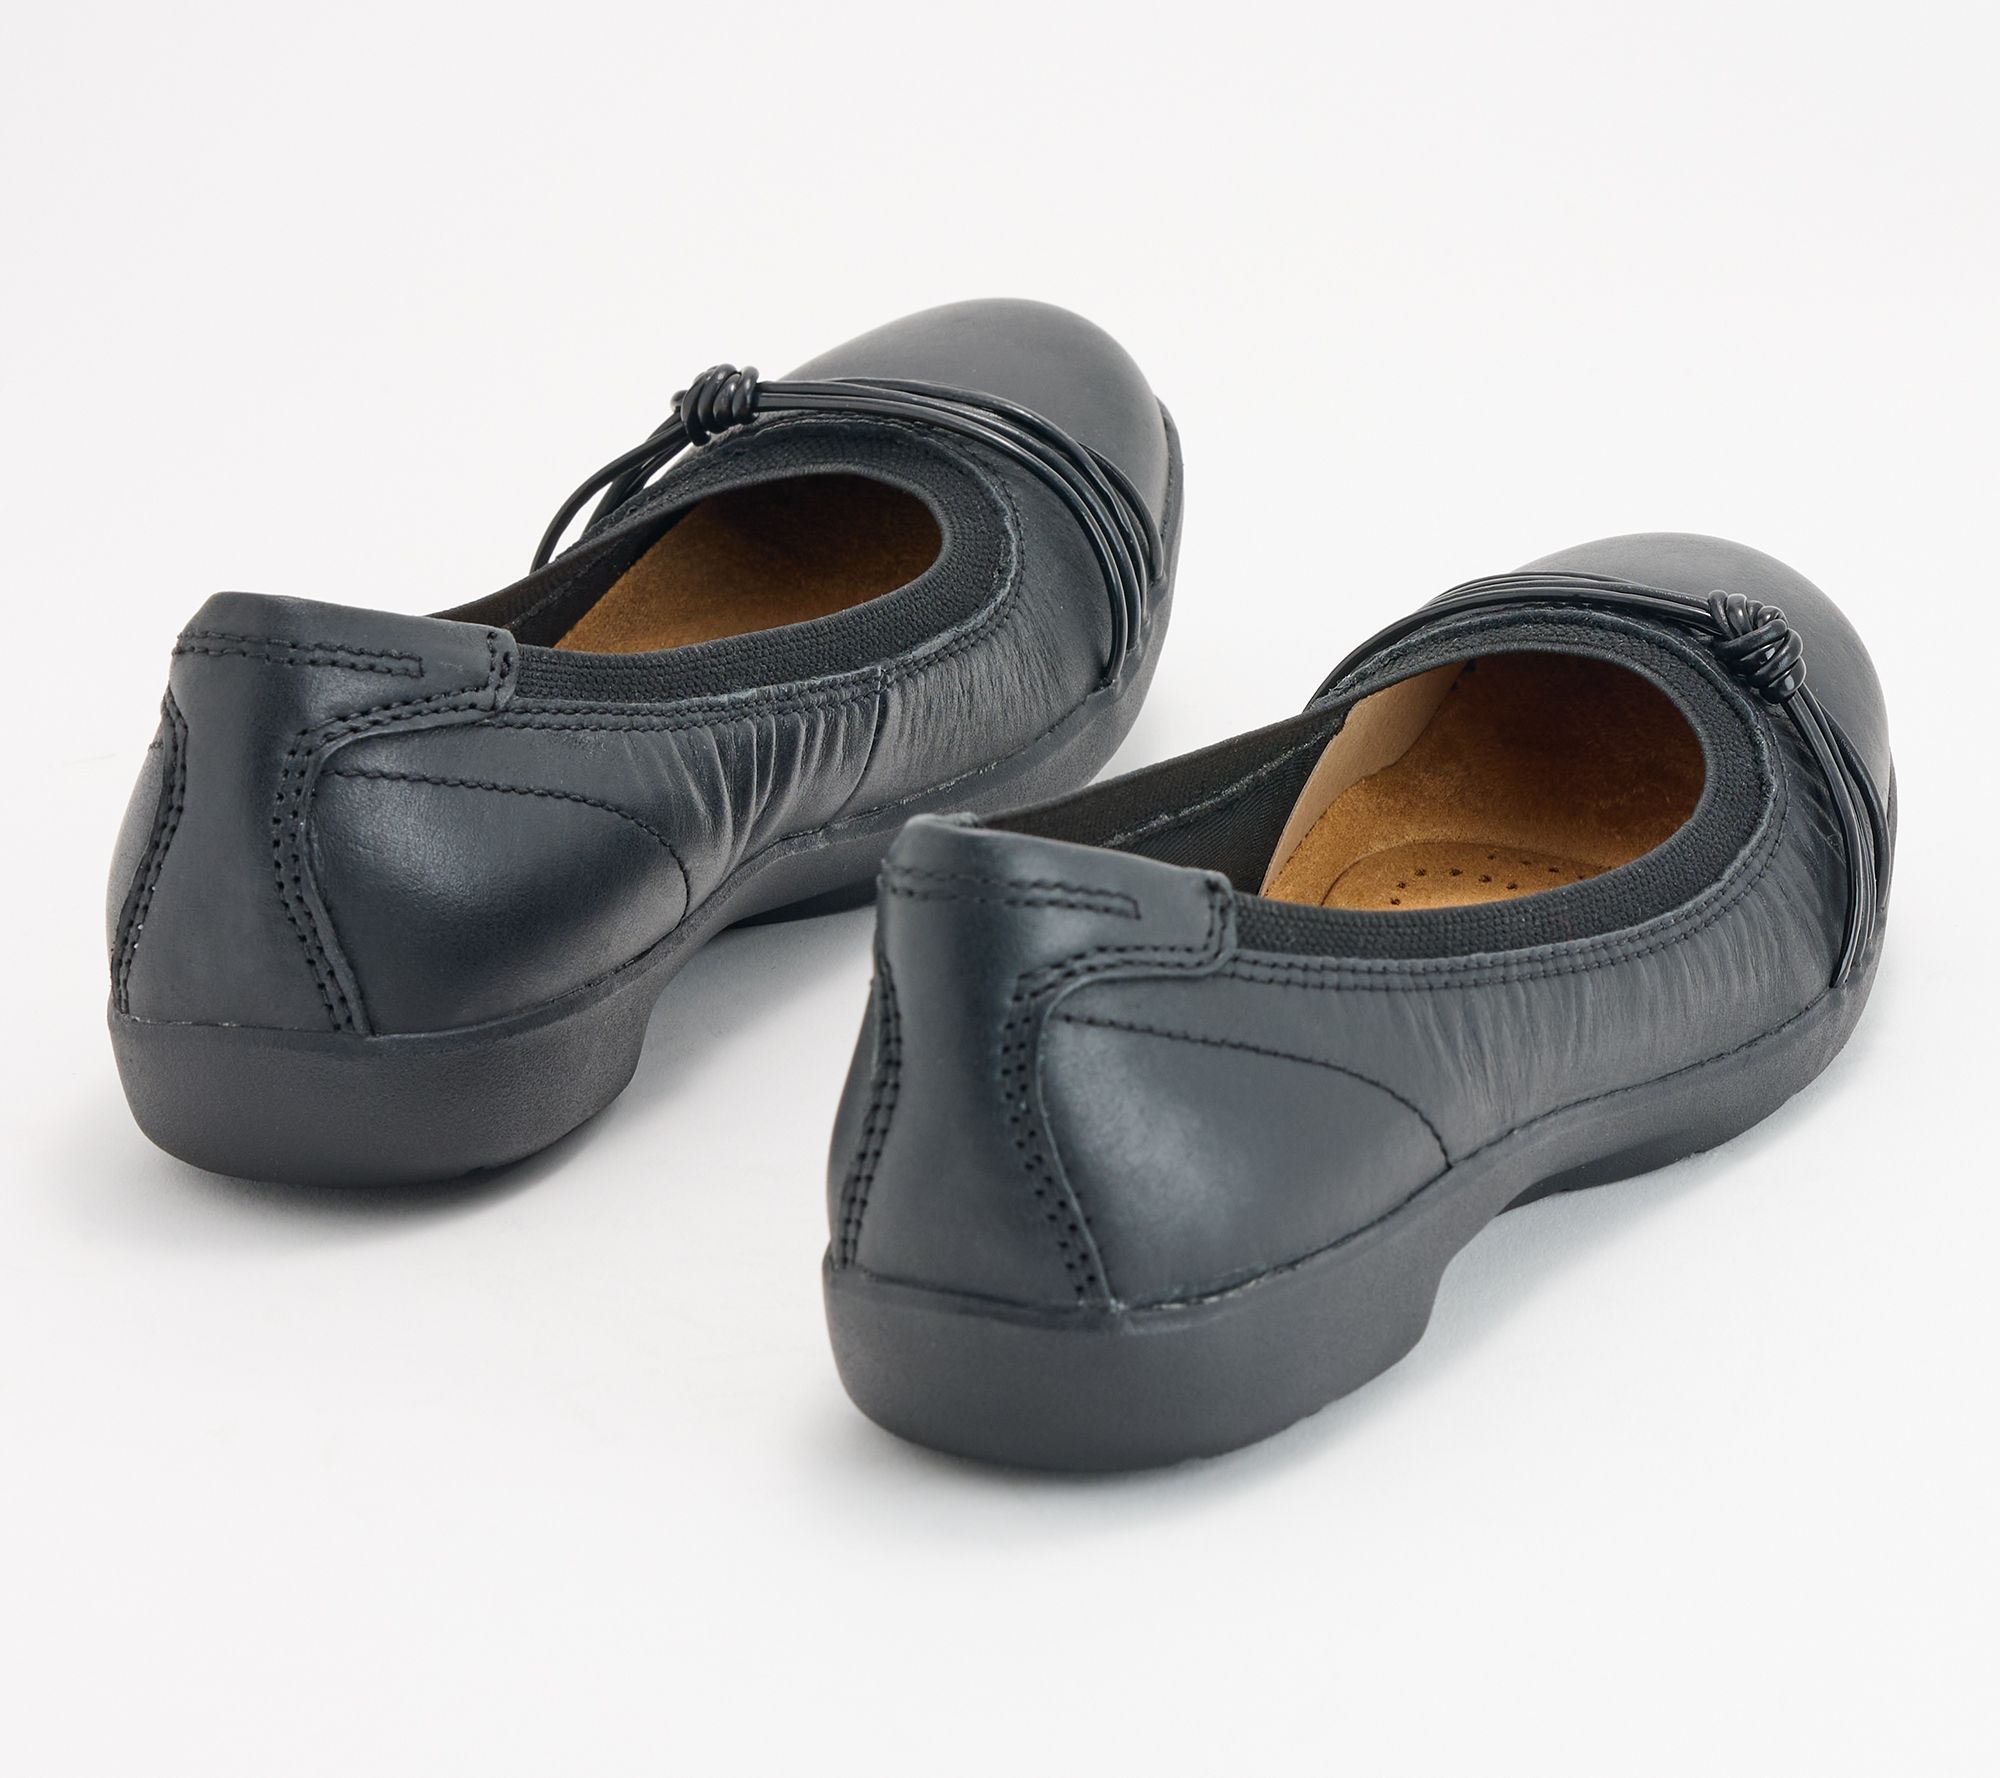 Kreta Skuffelse voldtage Clarks Collection Leather Ballet Flats - Meadow Rae - QVC.com